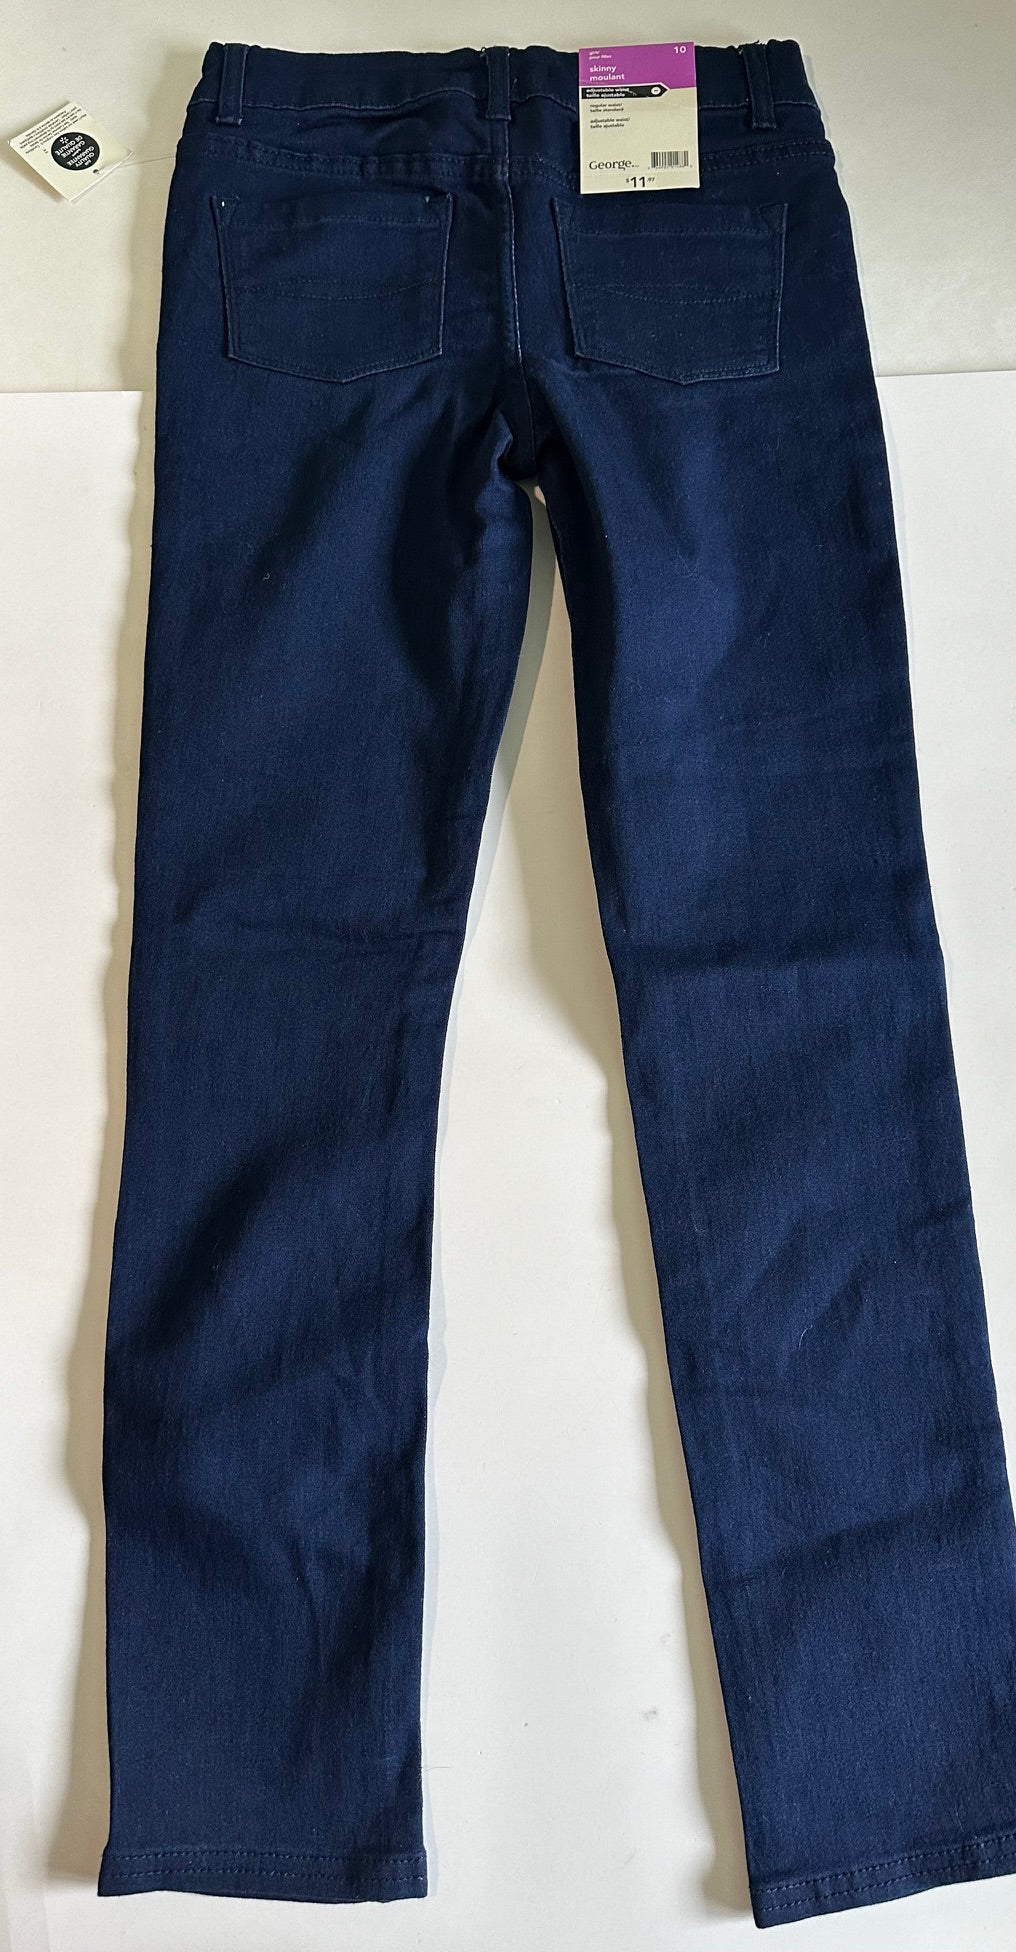 *New* George, Navy Blue Skinny Jeans - Size 10